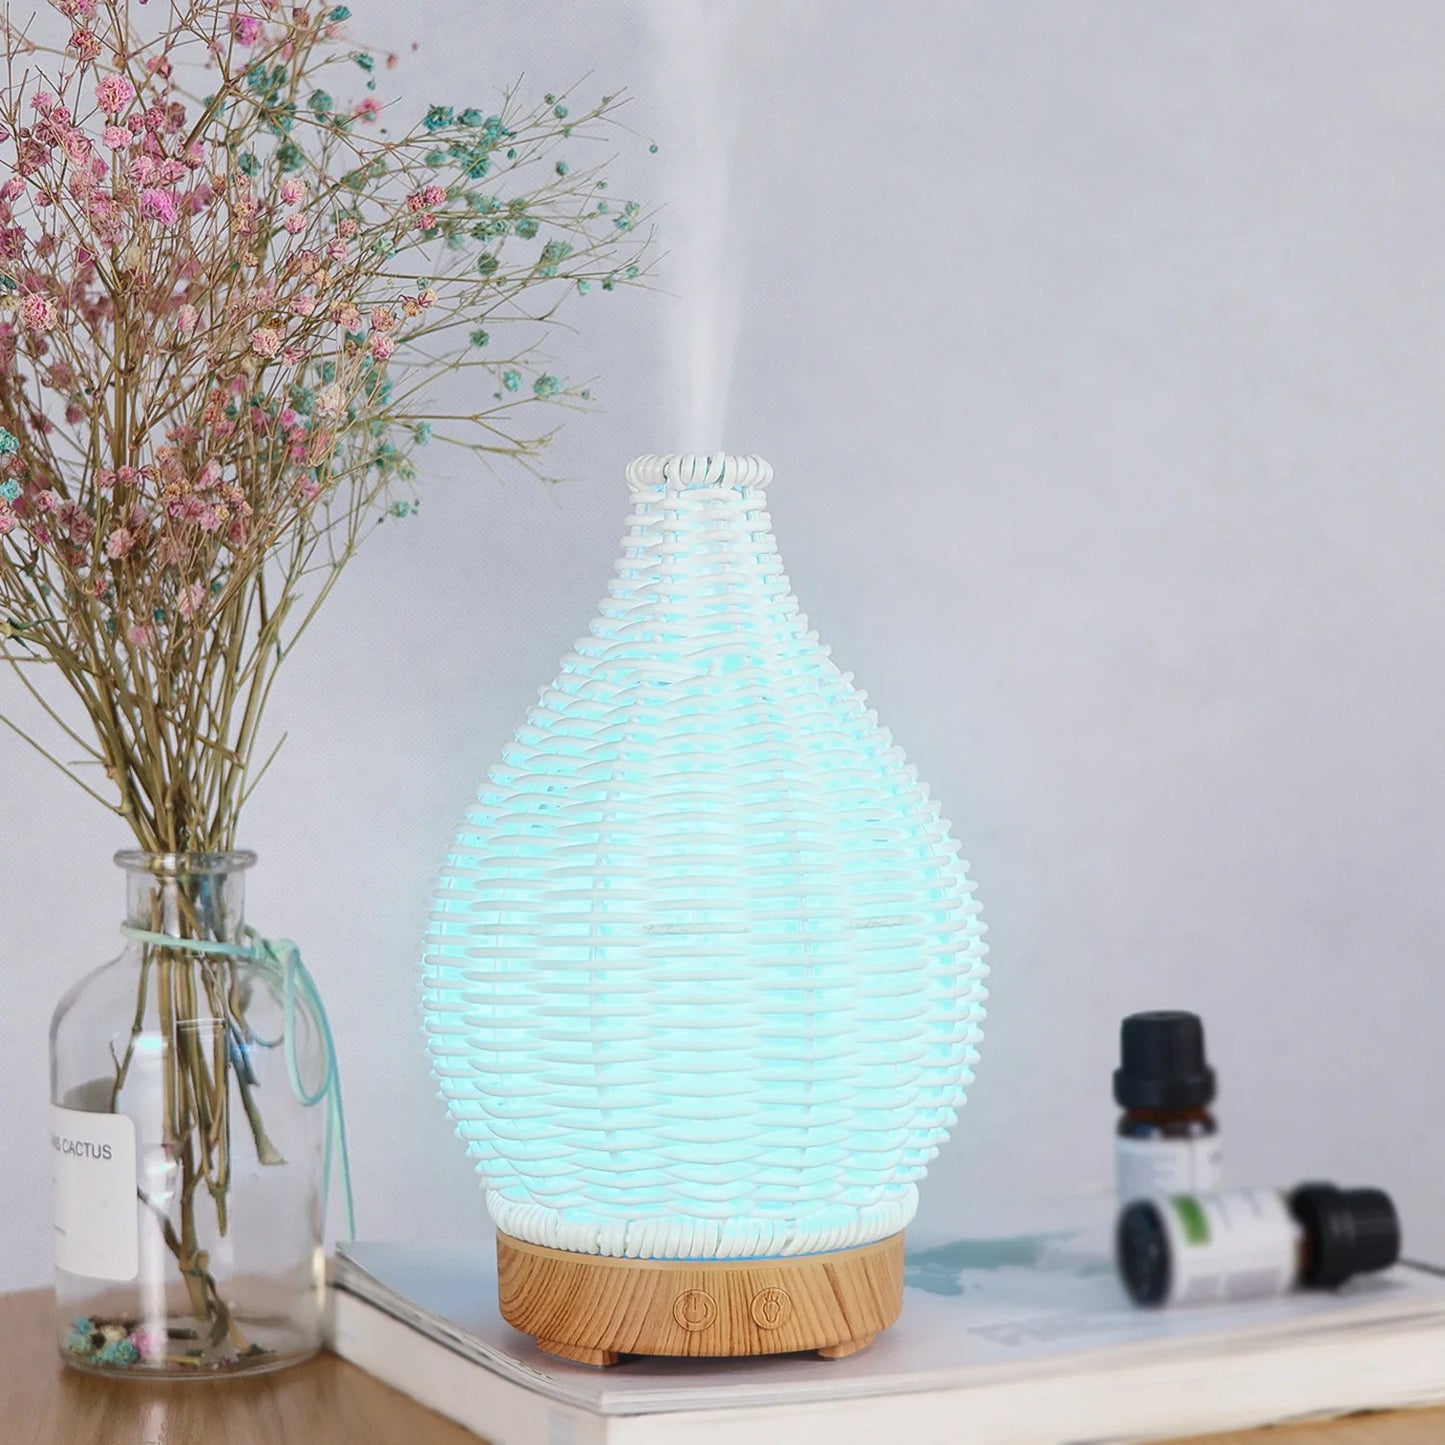 Wood Weave Mini Vase Air Humidifier USB Electronic Ultrasonic Water Fragrance Essential Oil Diffuser Home Room Fragrance